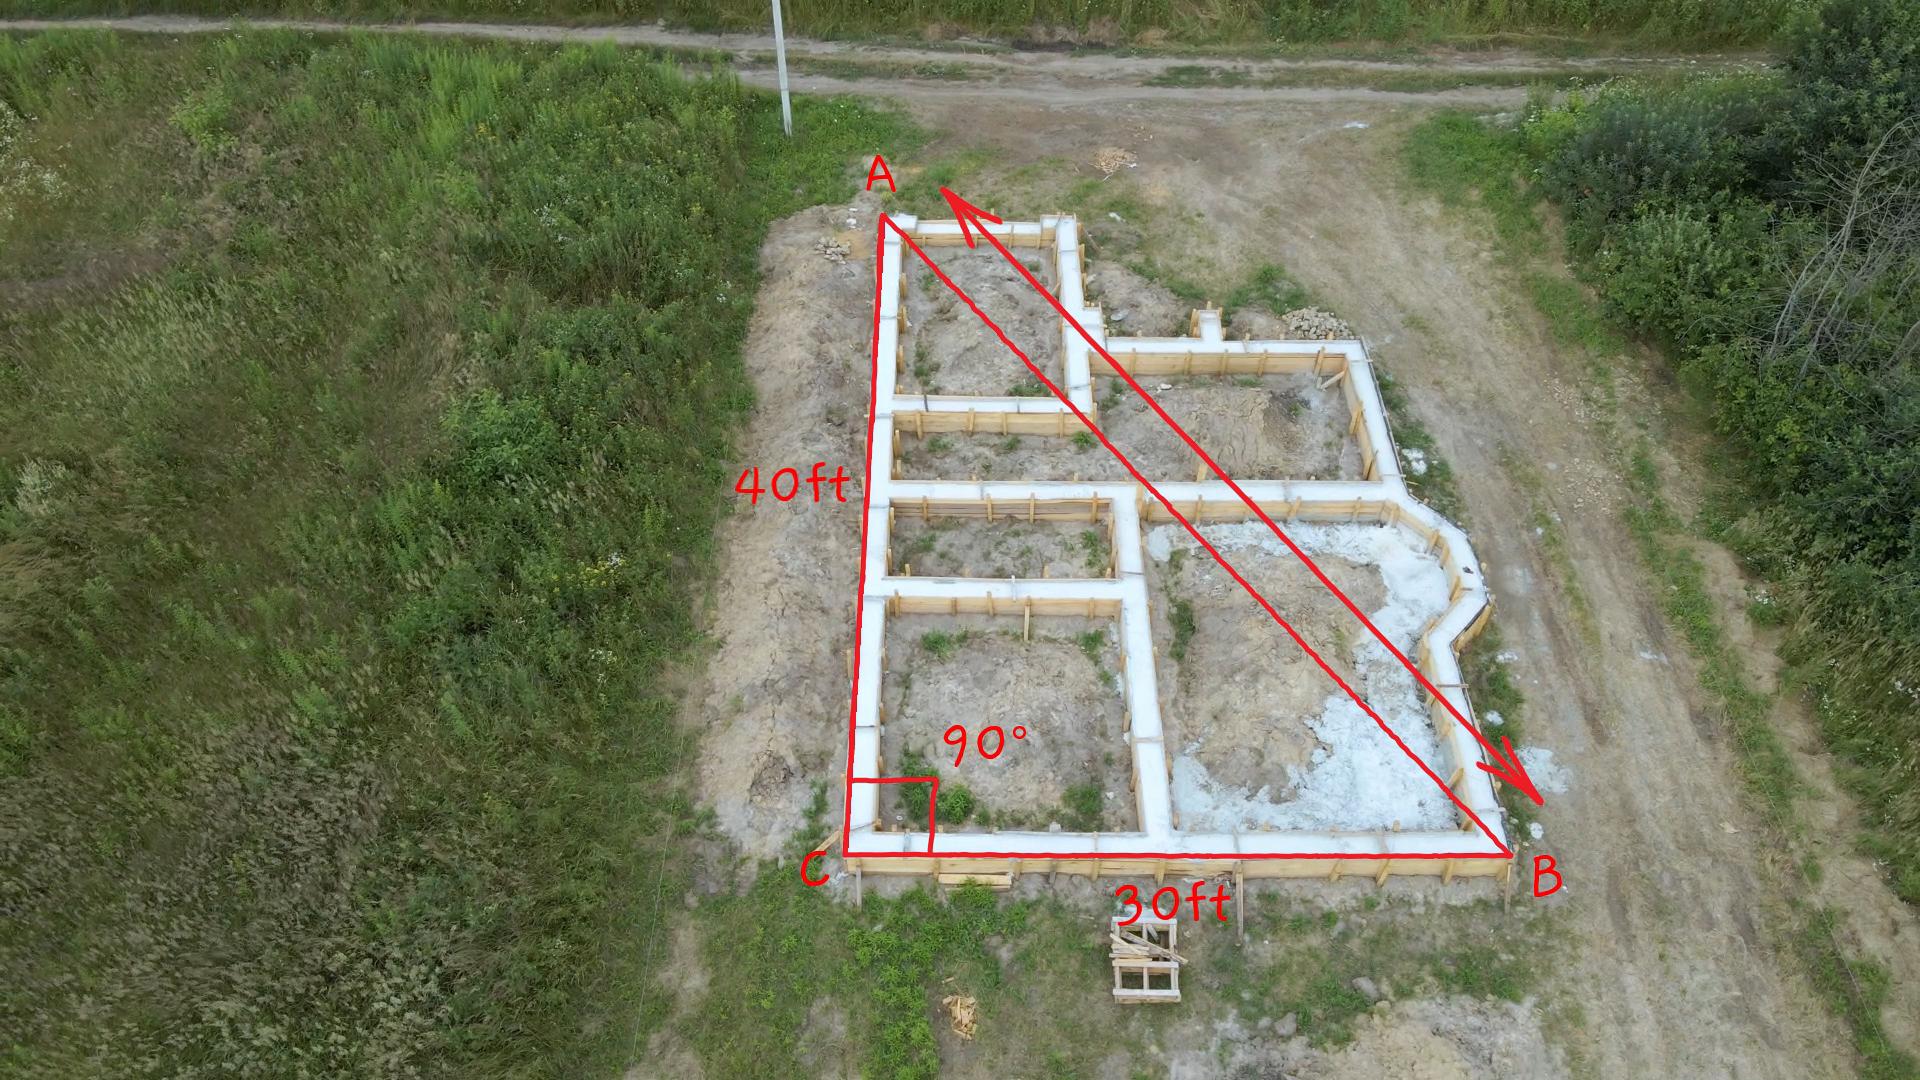 Foundation with sides of 30 and 40 ft. Right triangle is drawn on this foundation.